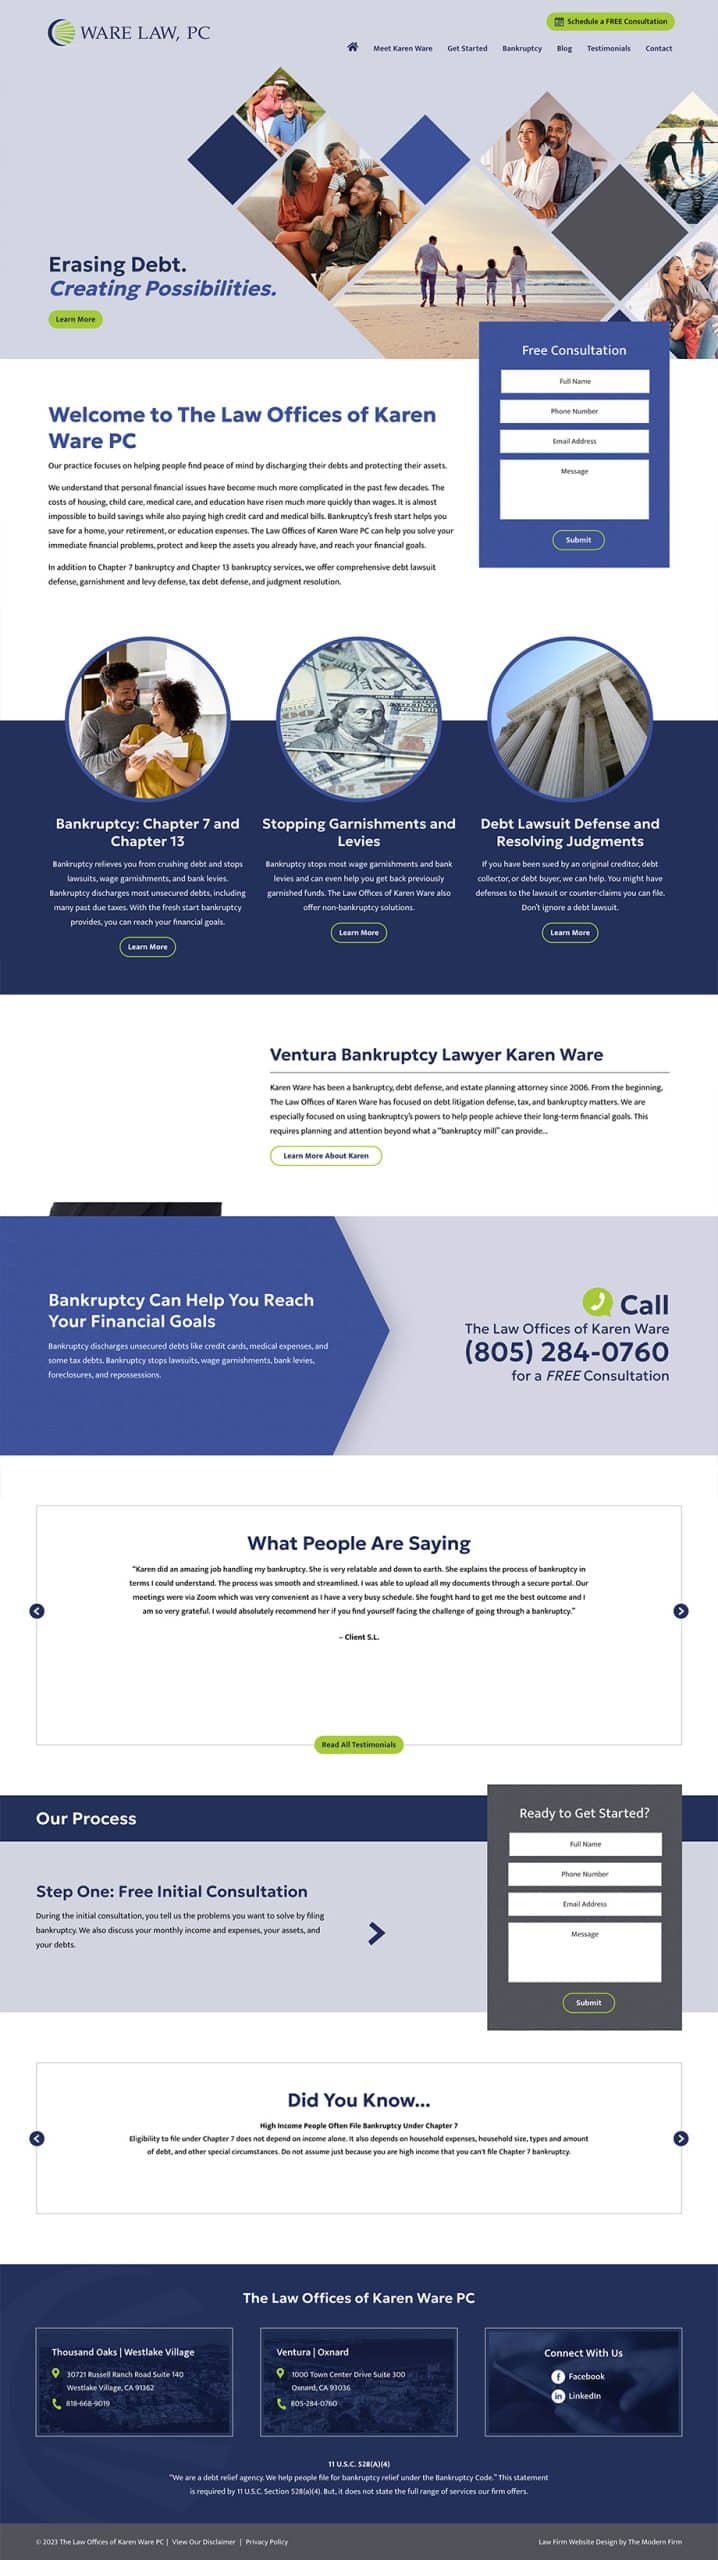 Law Firm Website Design for The Law Offices of Karen Ware PC